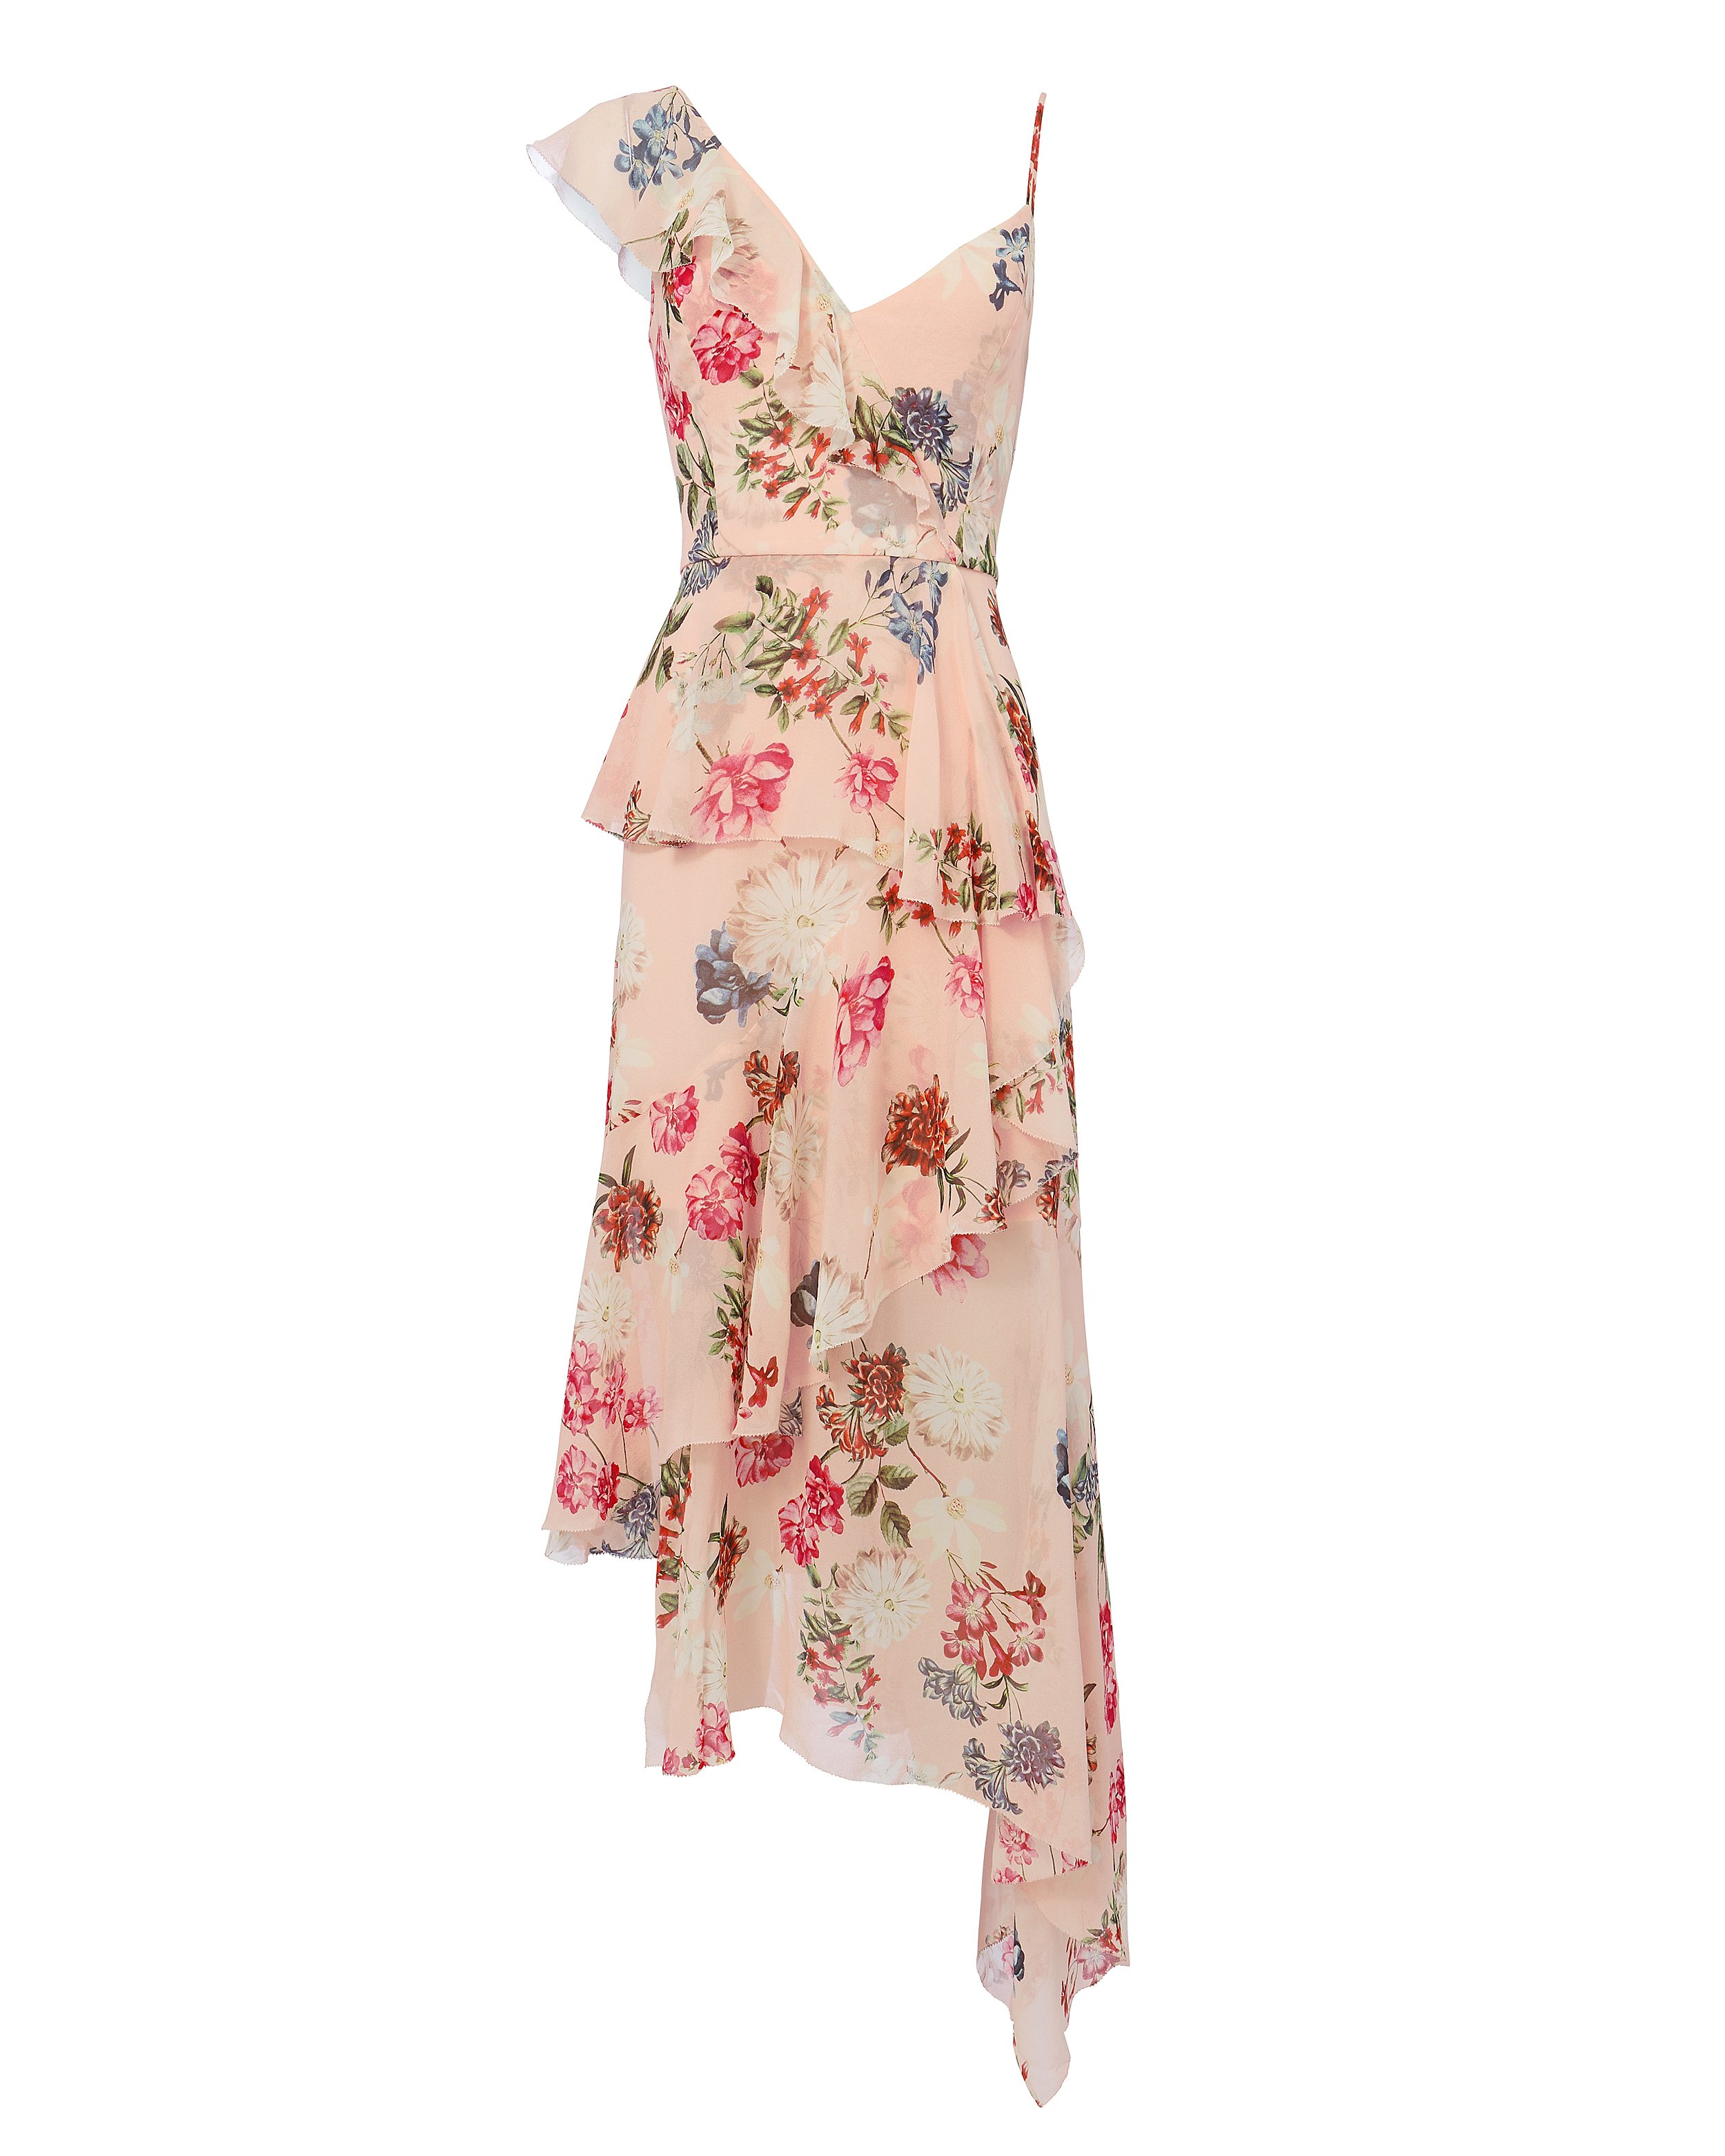 Strappy Ruffle-Trimmed Romantic Floral Dress | Nicholas